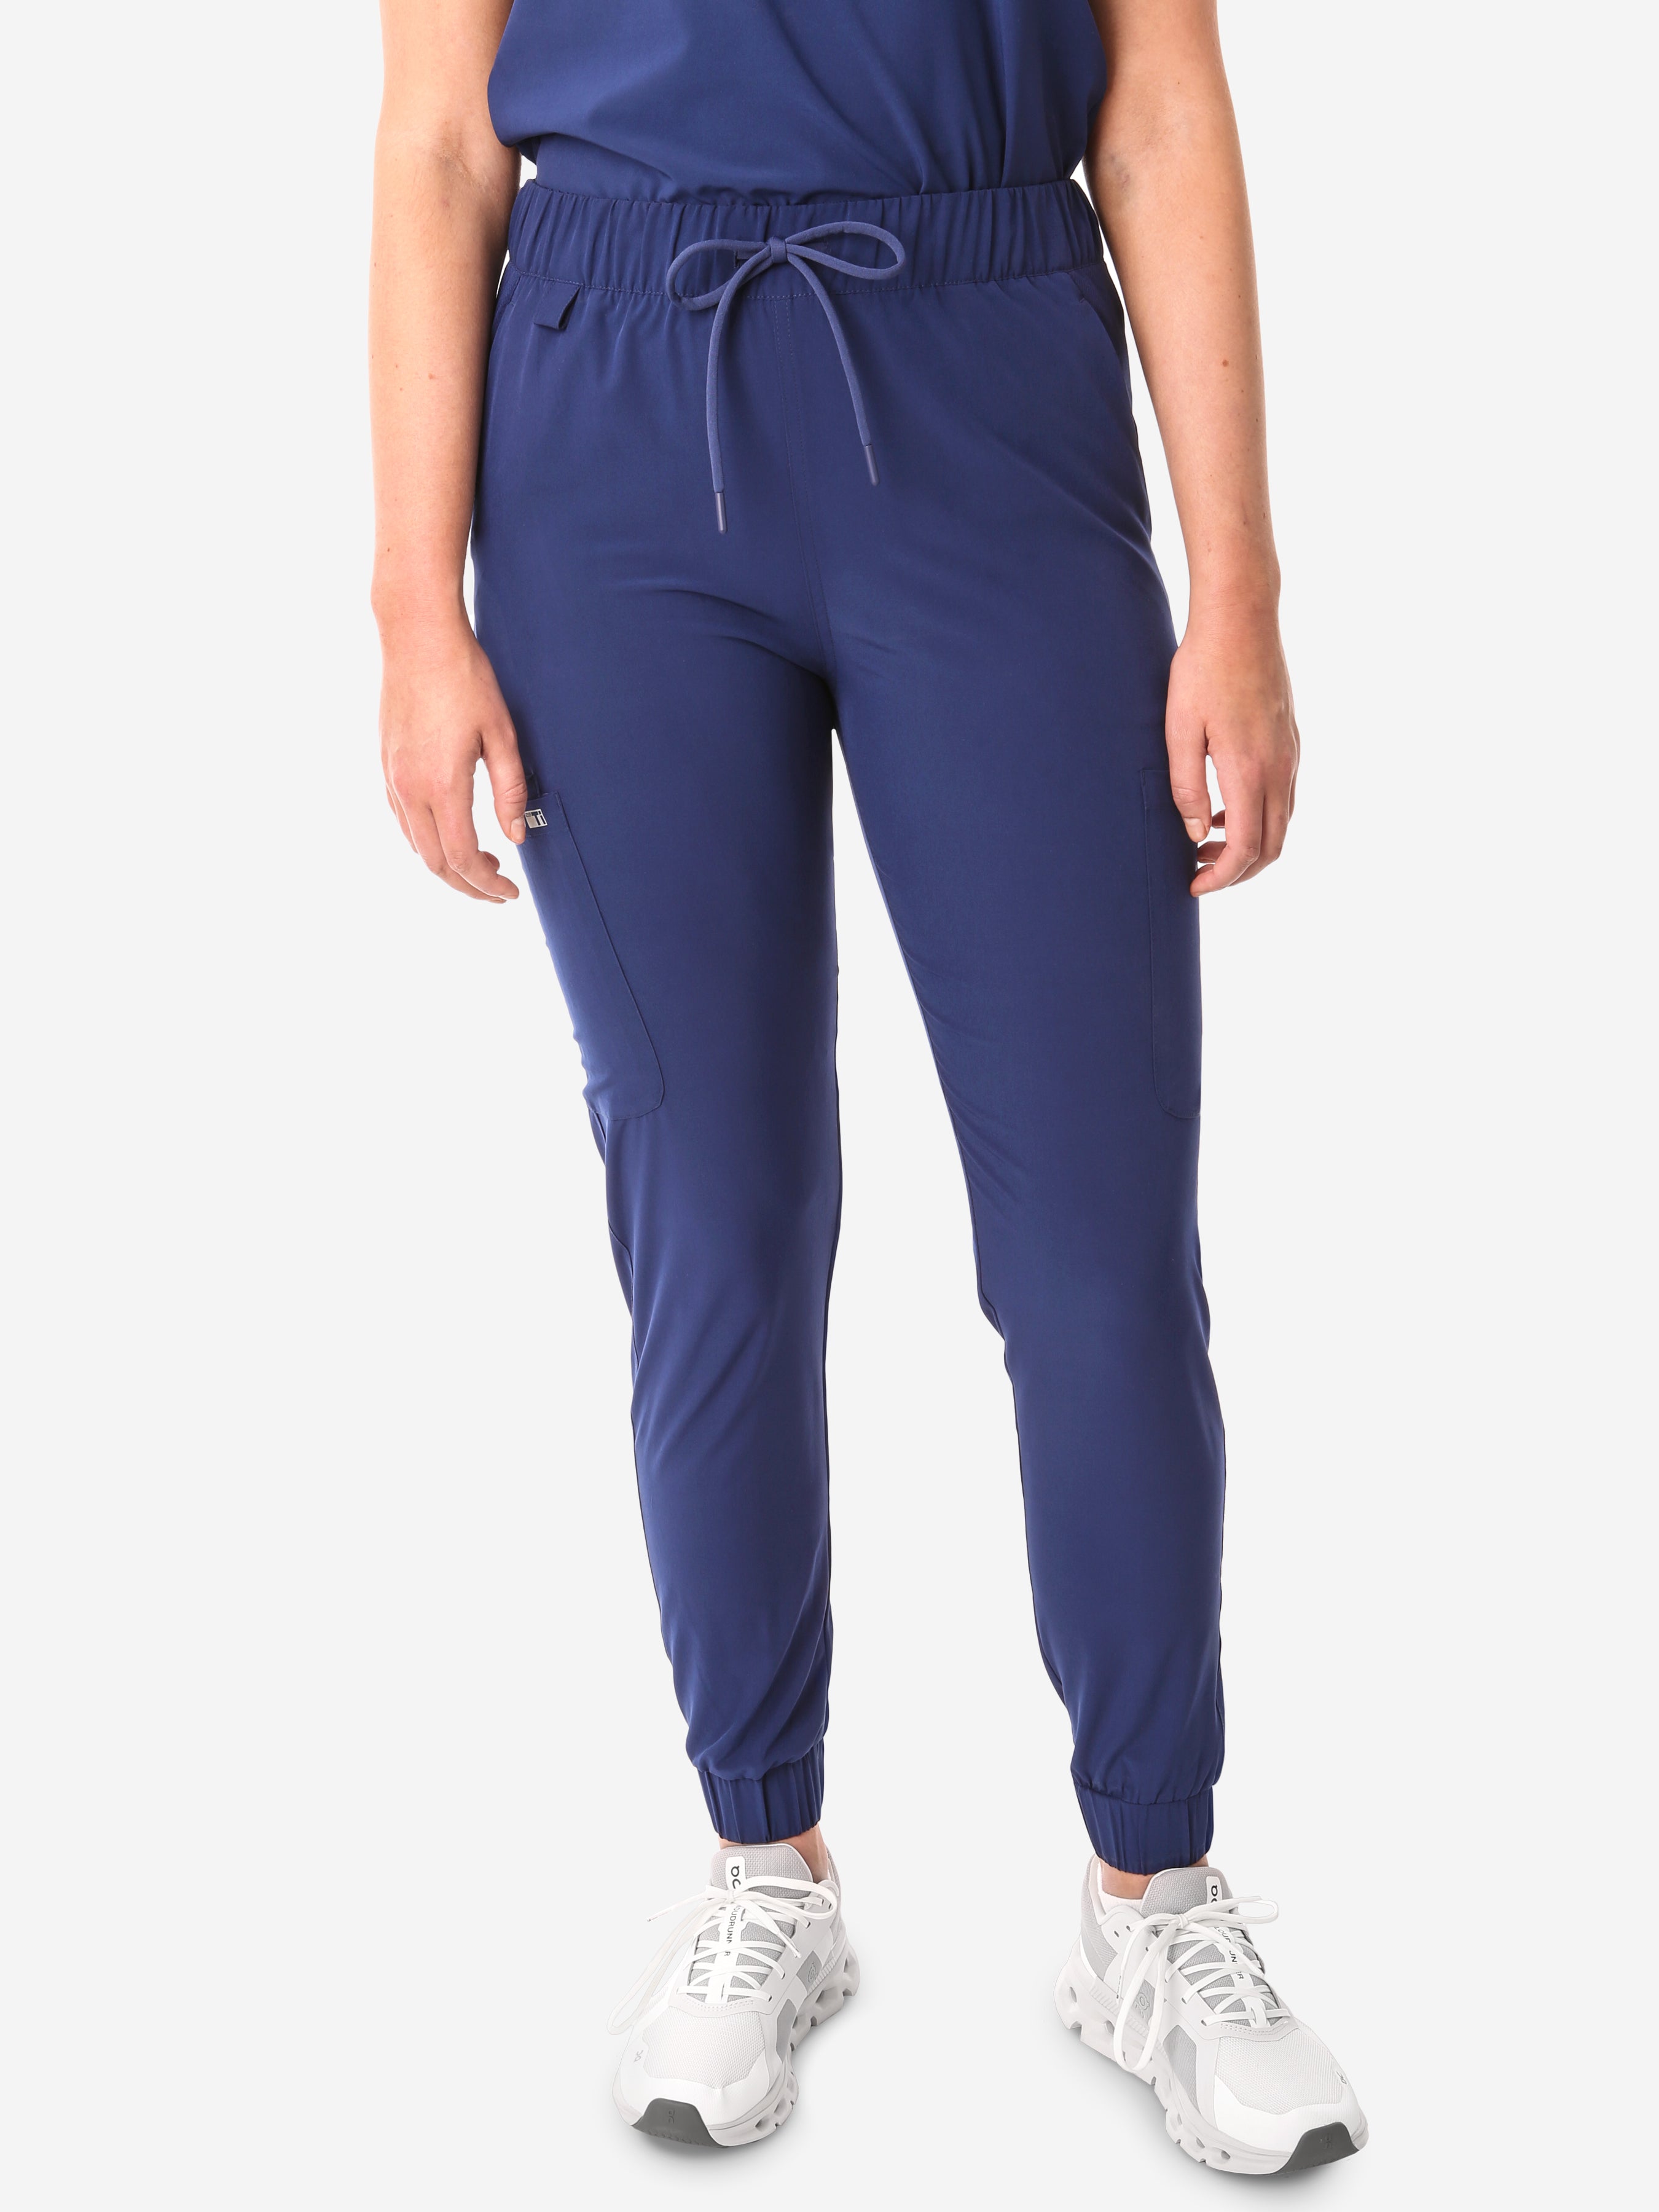 TiScrubs Navy Blue Women&#39;s Stretch Perfect Jogger Pants Front View Pants Only